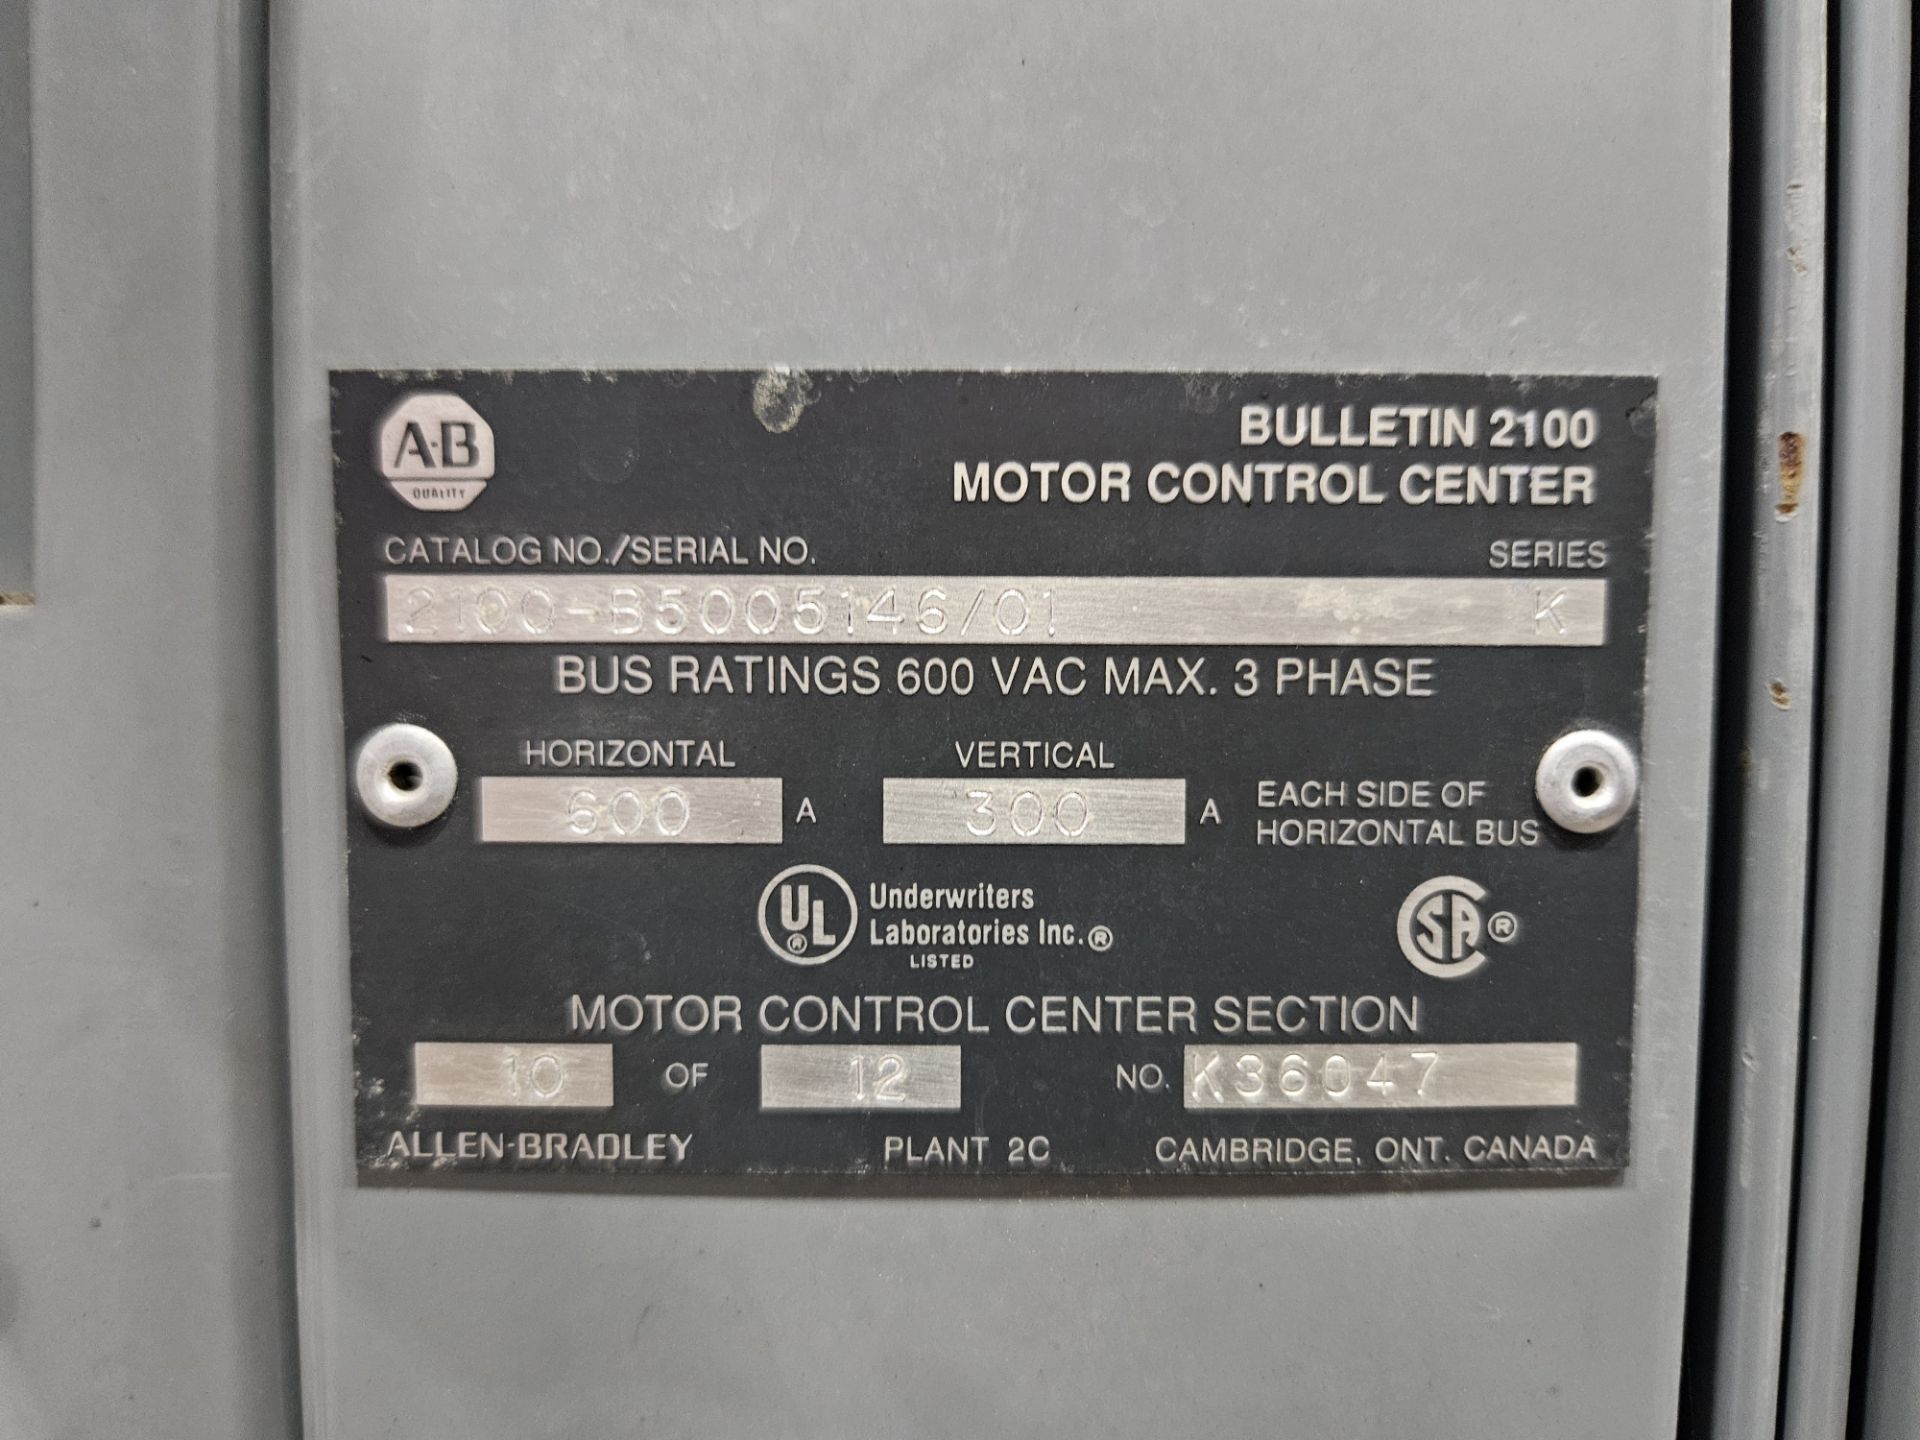 MOTOR CONTROL CENTER - 12 SECTIONS AND PLC CONTROL PANEL W/ CONTENTS, S/N: 2100-B5005146/01- ( - Image 15 of 46